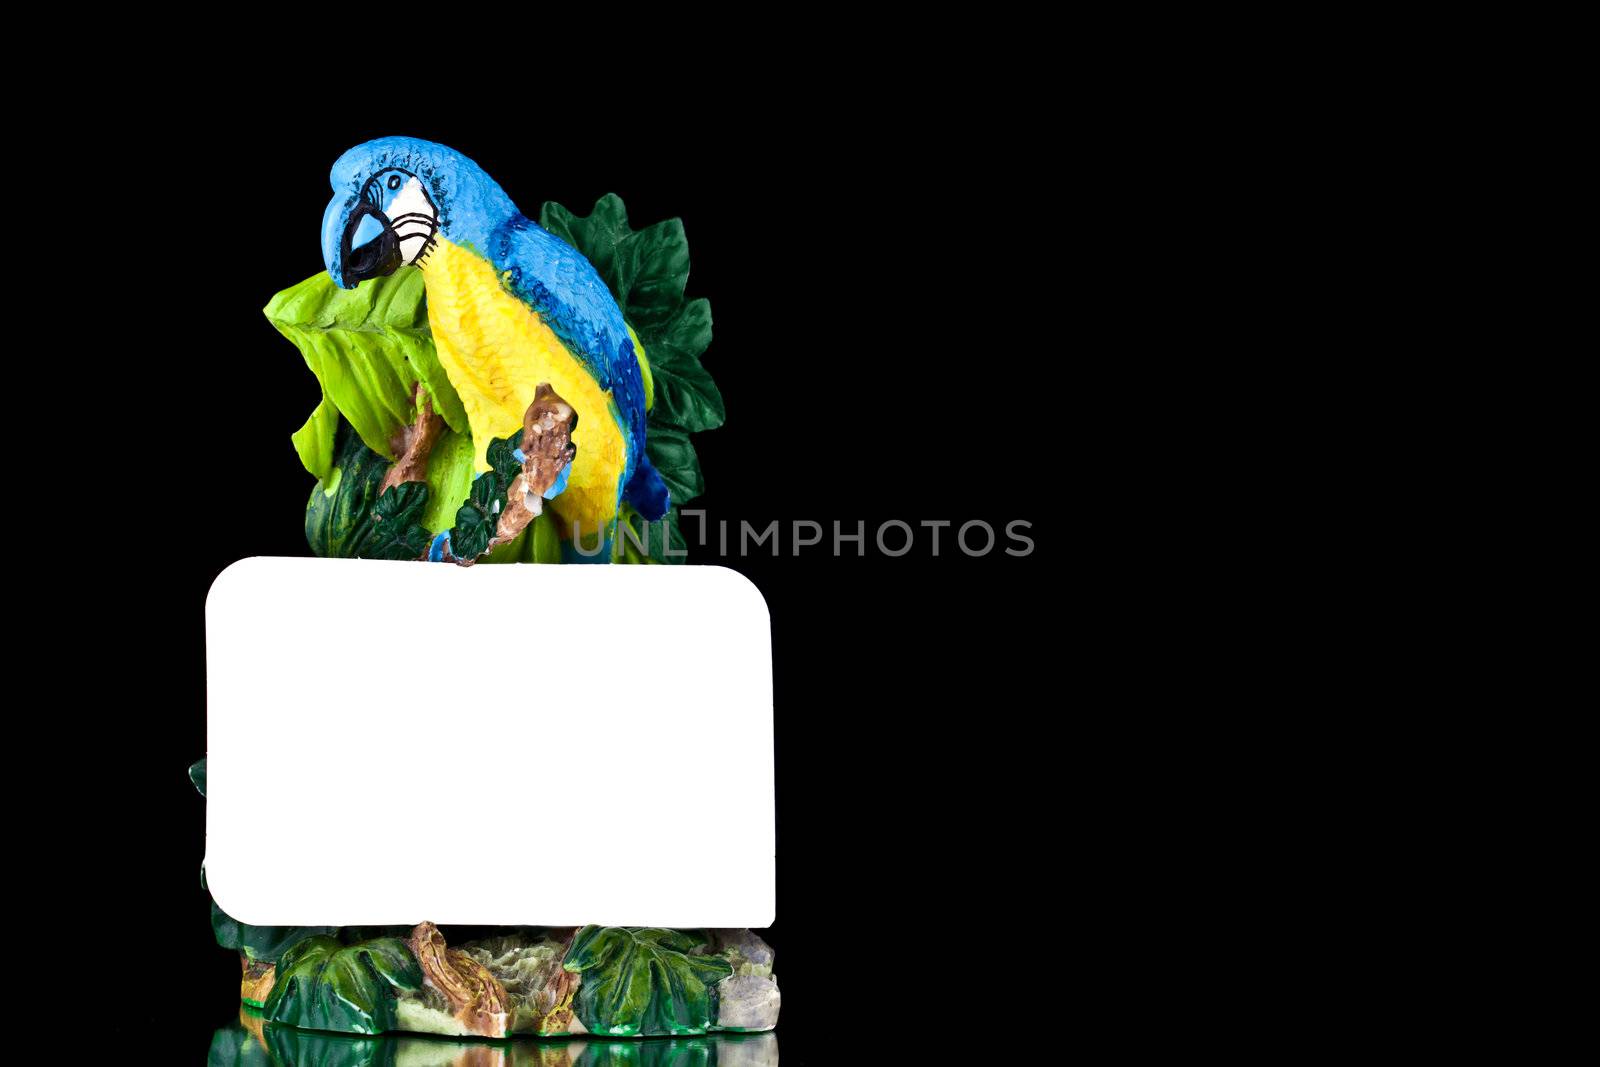 Parrot statue  by oneinamillion